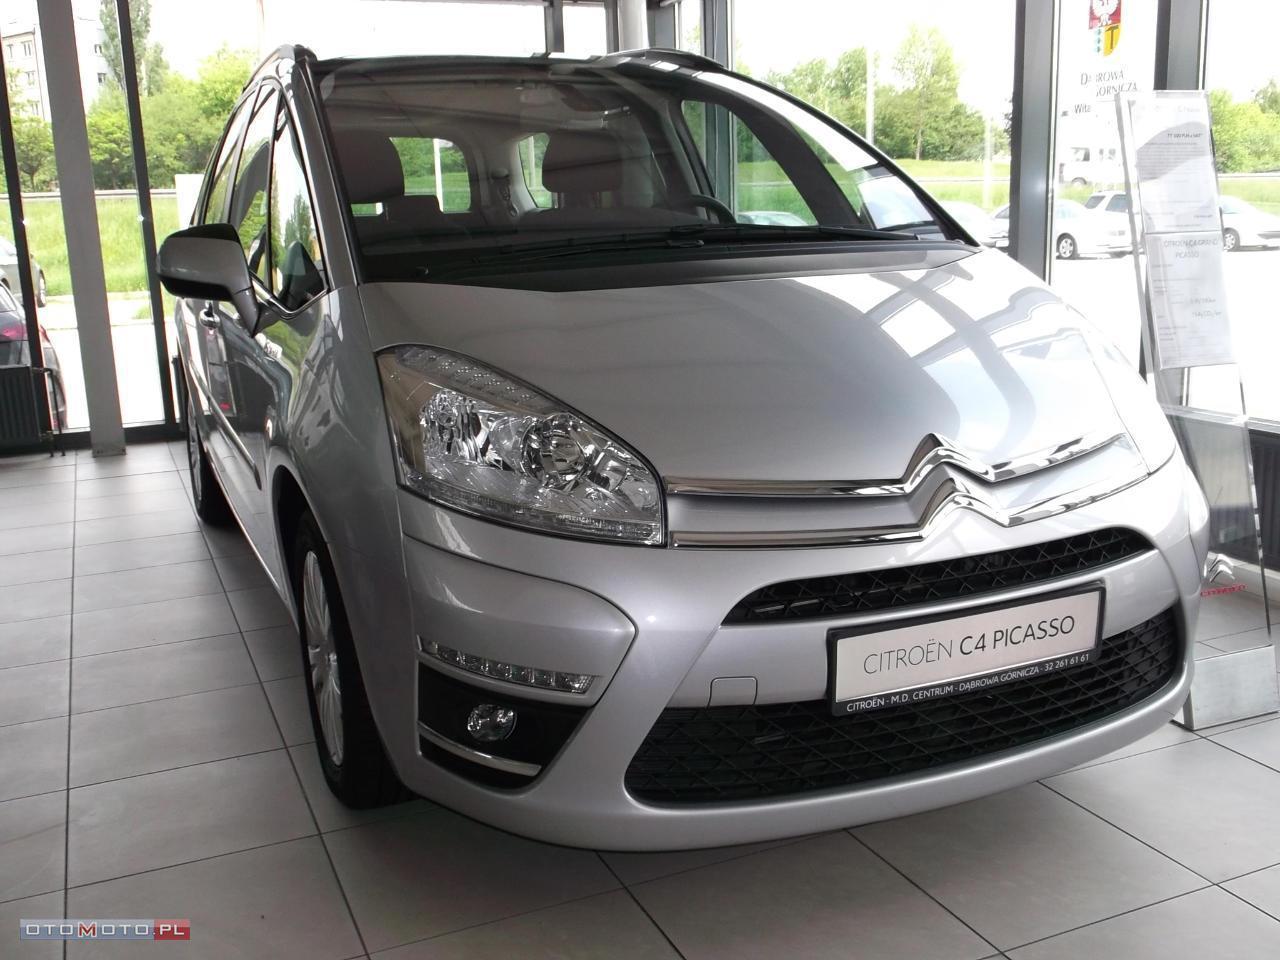 Citroën C4 Picasso SELECTION 2.0HDi 150KM NOWY!!!